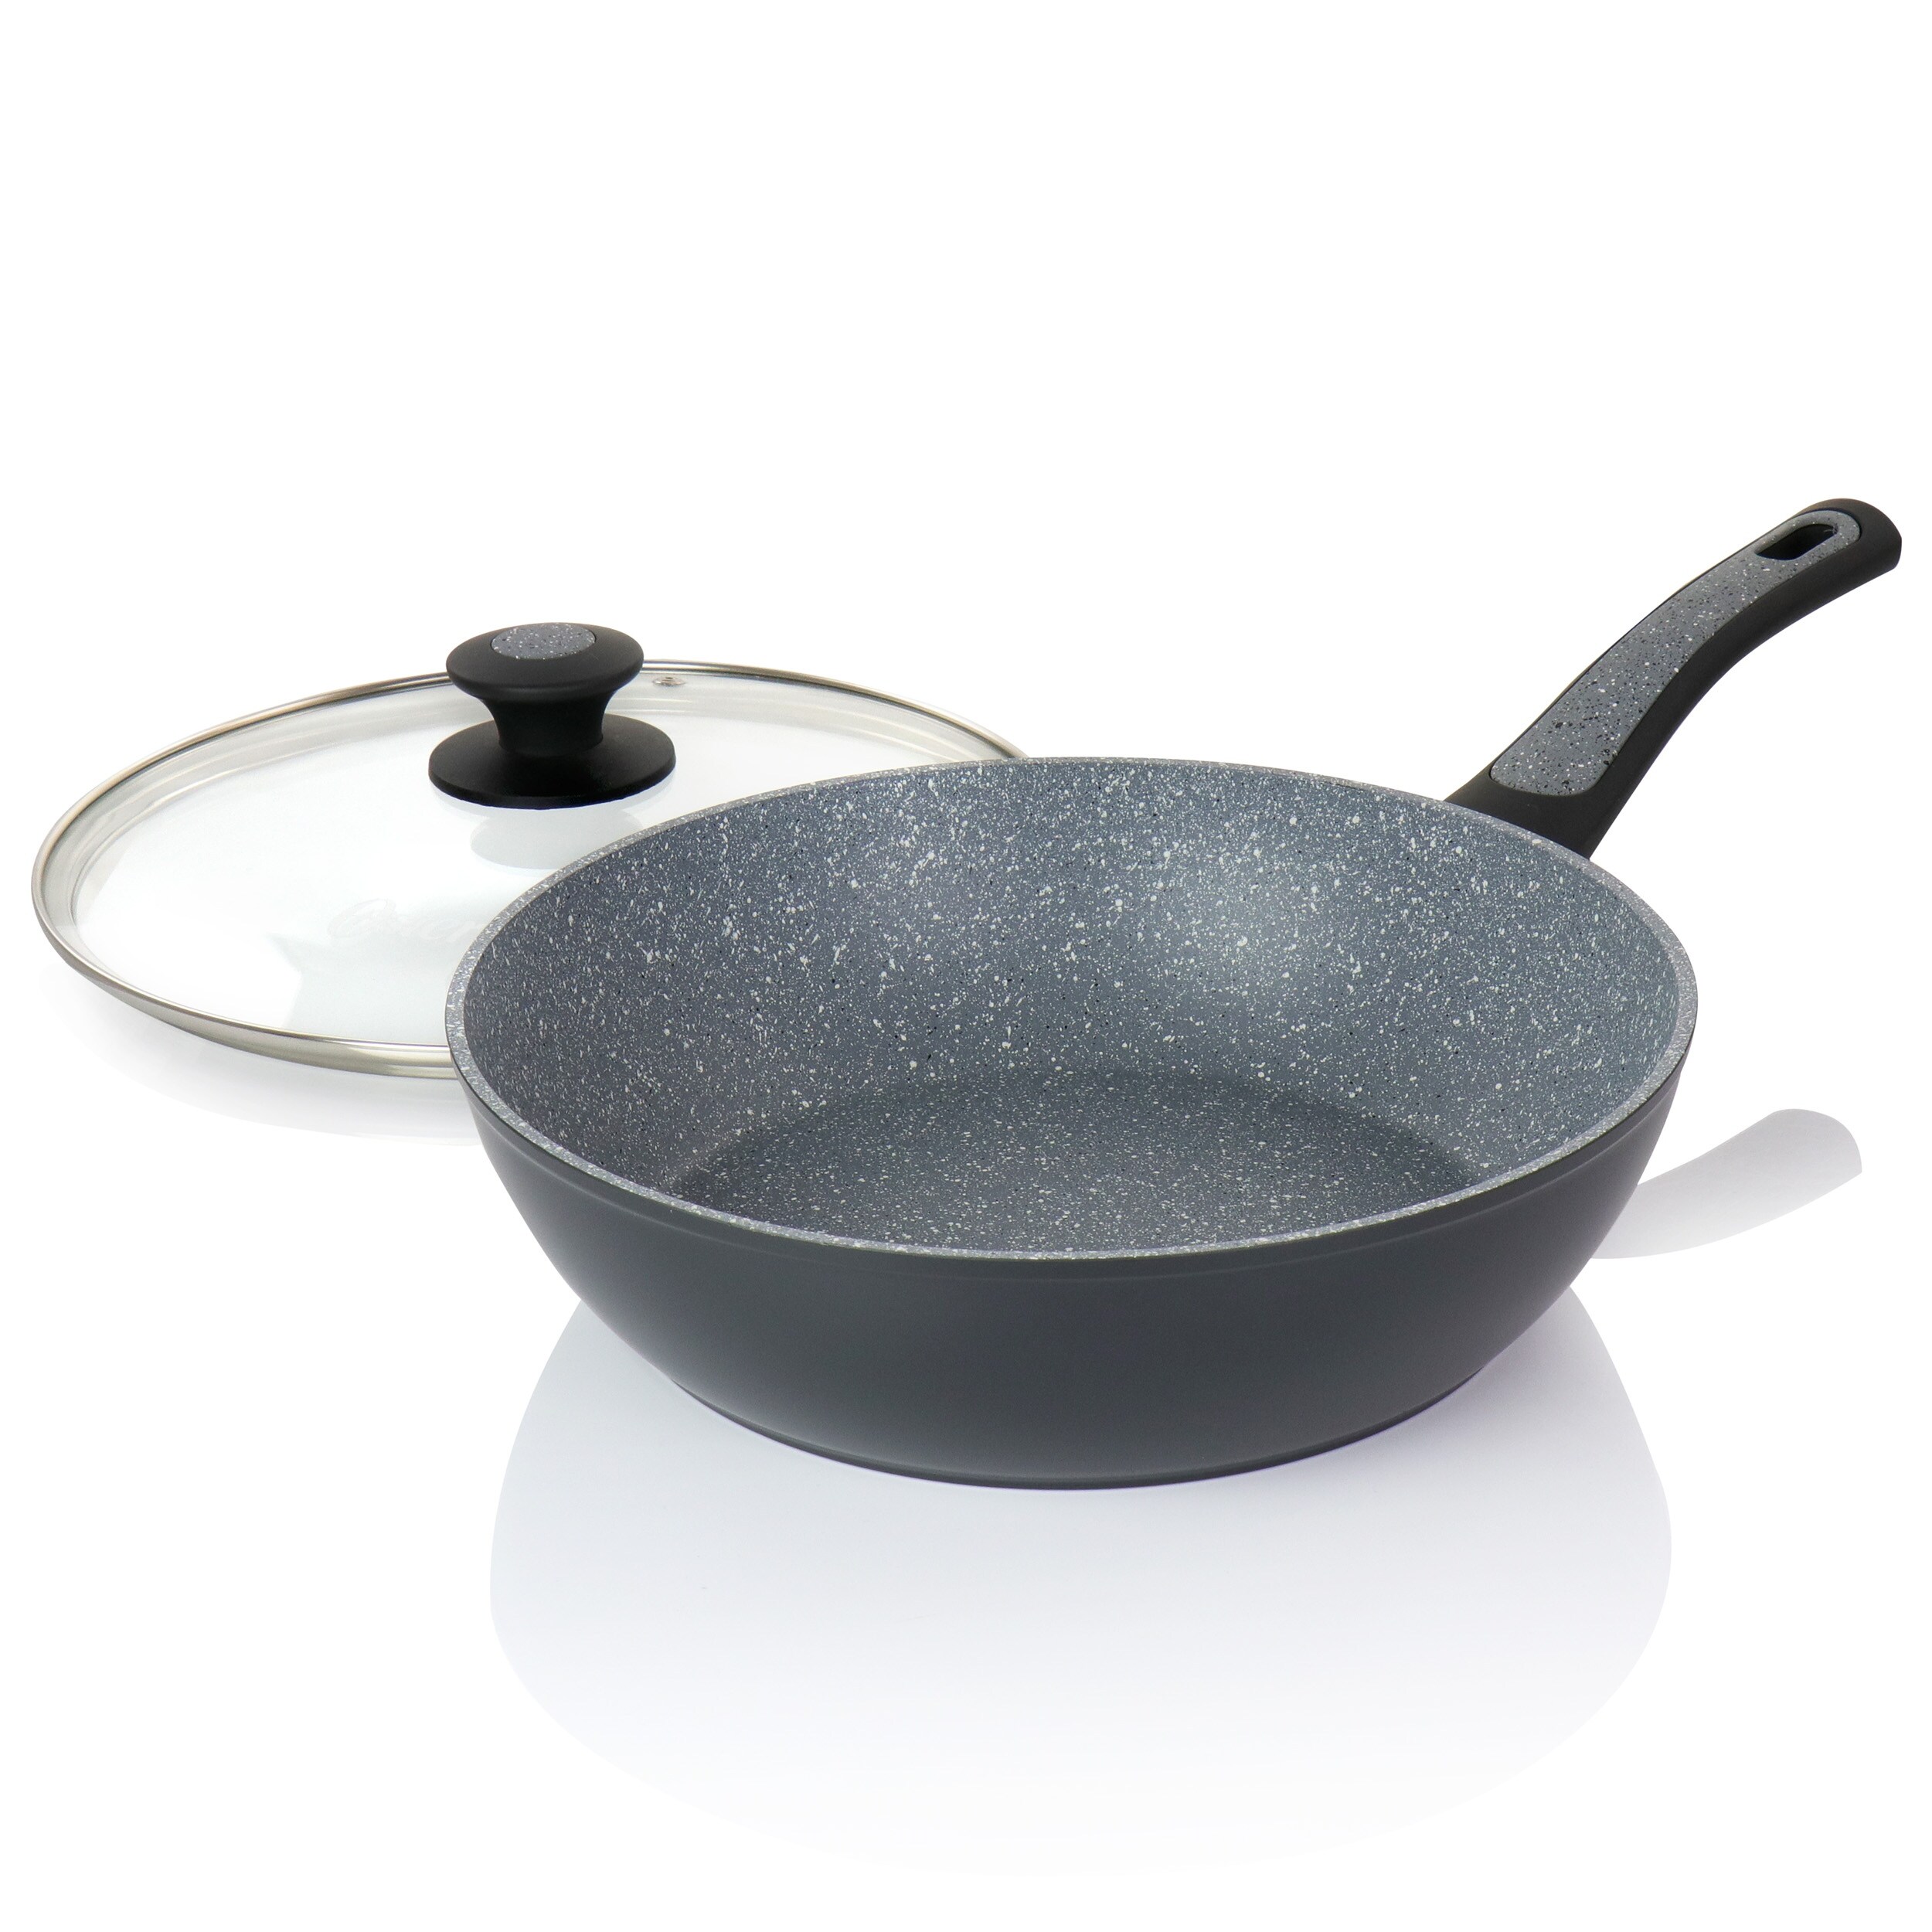 https://ak1.ostkcdn.com/images/products/is/images/direct/e990208731dc23f282d9a15737b6cfcf414baaf9/Oster-Bastone-3-Quart-Aluminum-Nonstick-Saute-Pan-in-Speckled-Gray.jpg